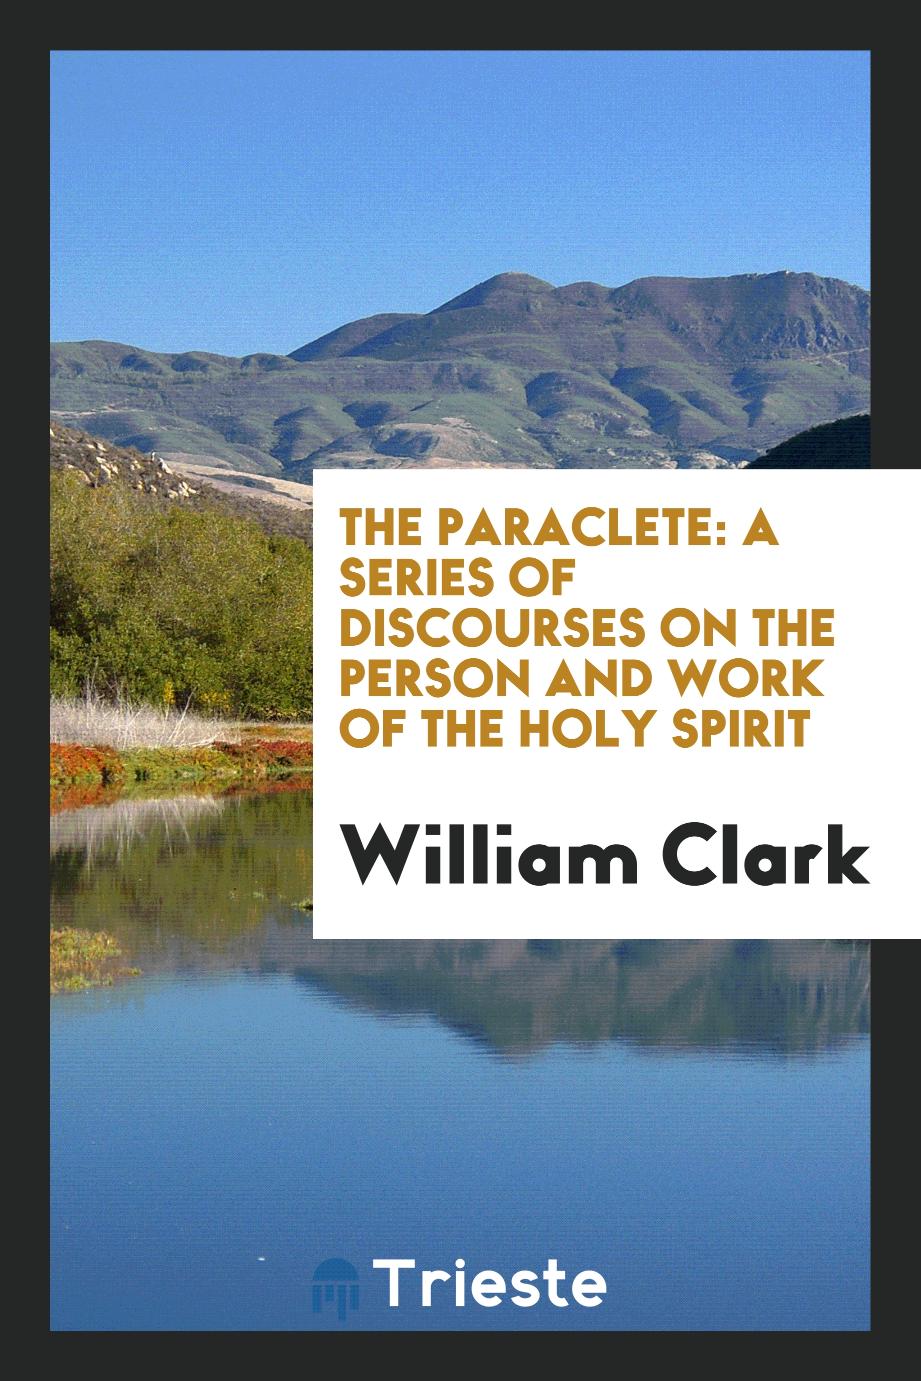 The paraclete: a series of discourses on the person and work of the Holy Spirit